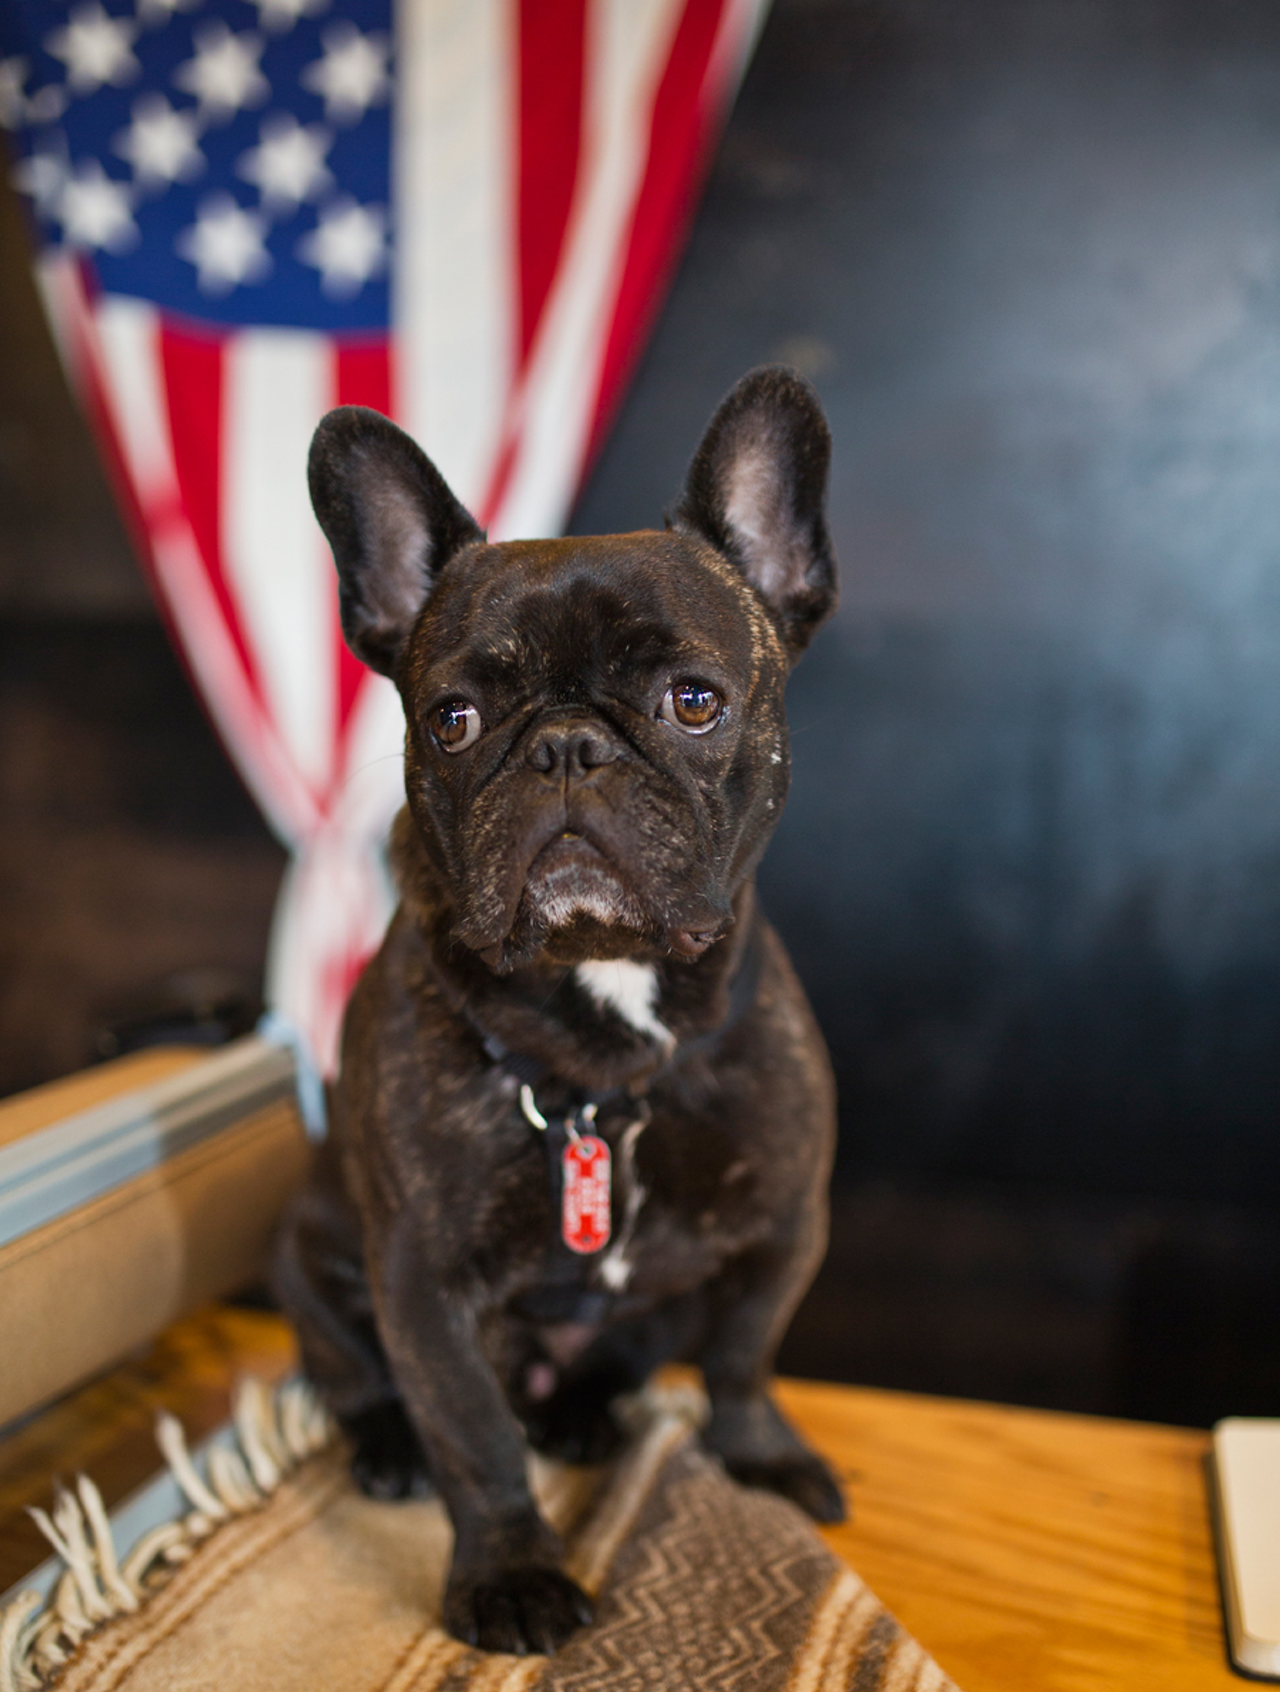 Name: Craig // Breed: French Bulldog // Occupation: Model at Article Menswear // Has there ever been a more dapper model than Craig, the handsome French bulldog who has become the face of Article Menswear? This heartbreaker can be found soaking up some sunshine, repping some Cincinnati gear (a la a cozy Bengals tee) or lounging beside the newest arrivals on Article’s Instagram page. Pictures are free — but no autographs please. Craig’s a busy man.